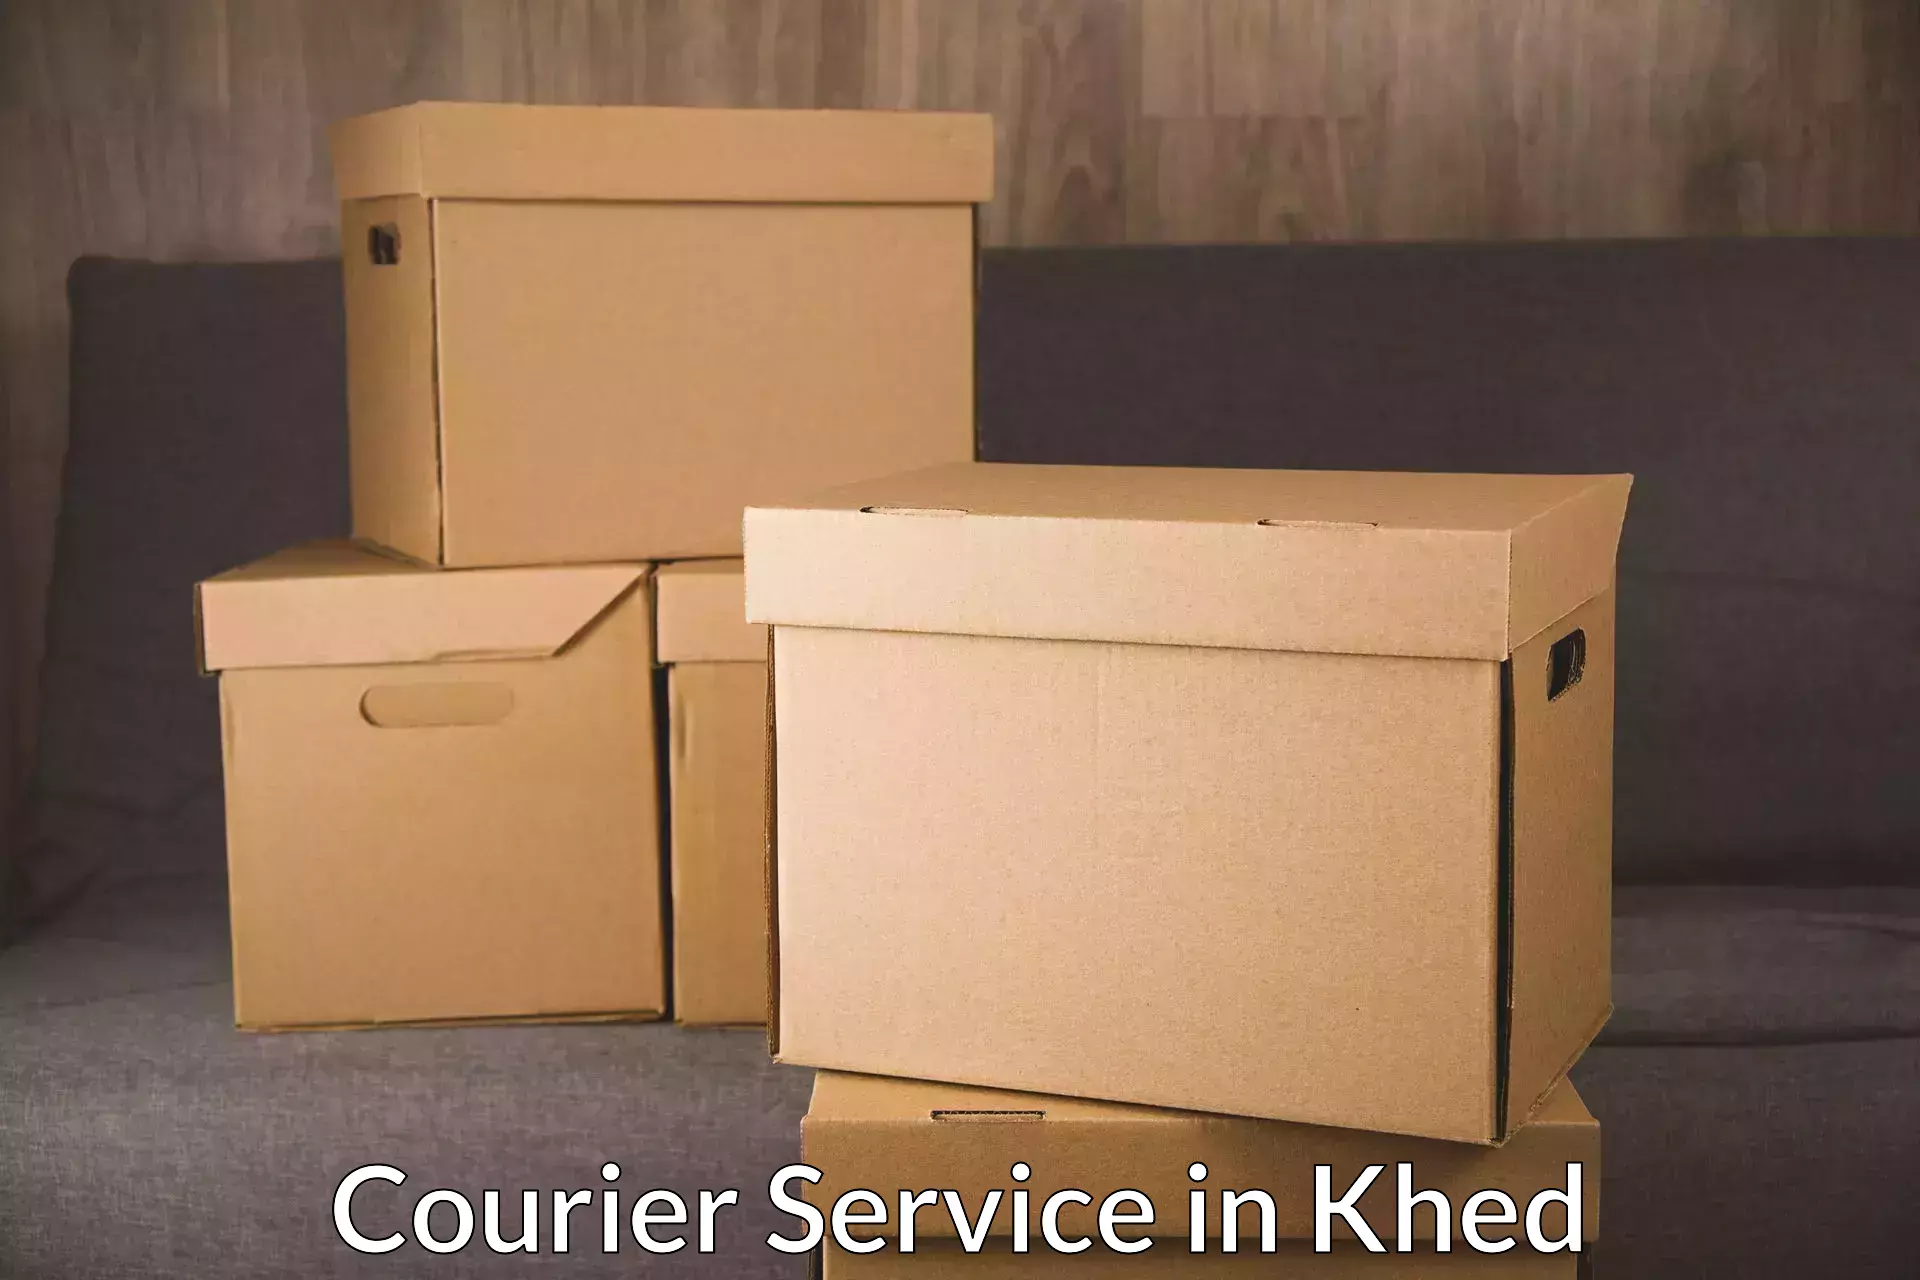 Enhanced delivery experience in Khed